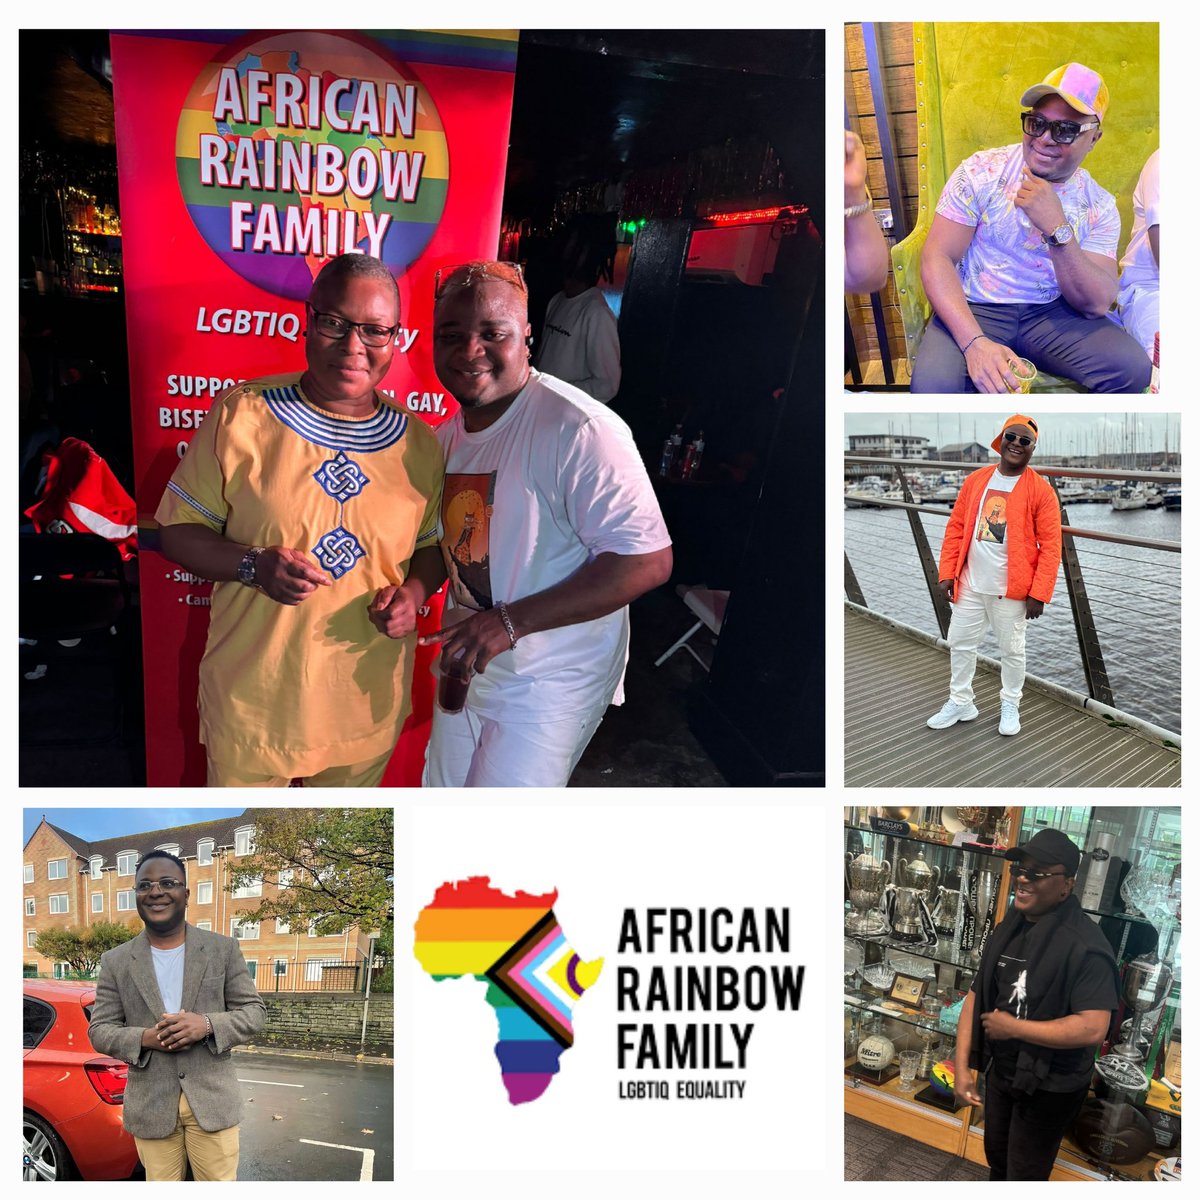 We hope that you join everyone at African Rainbow Family @AfricanRainbow1 in giving a huge congratulations to Henry Ese Idigun, one of our siblings from our London centre, who's just been granted their #refugee status! 🏳️‍🌈🎊 #Noprideindeportation #RefugeesWelcome #LGBTIQ #Freedom